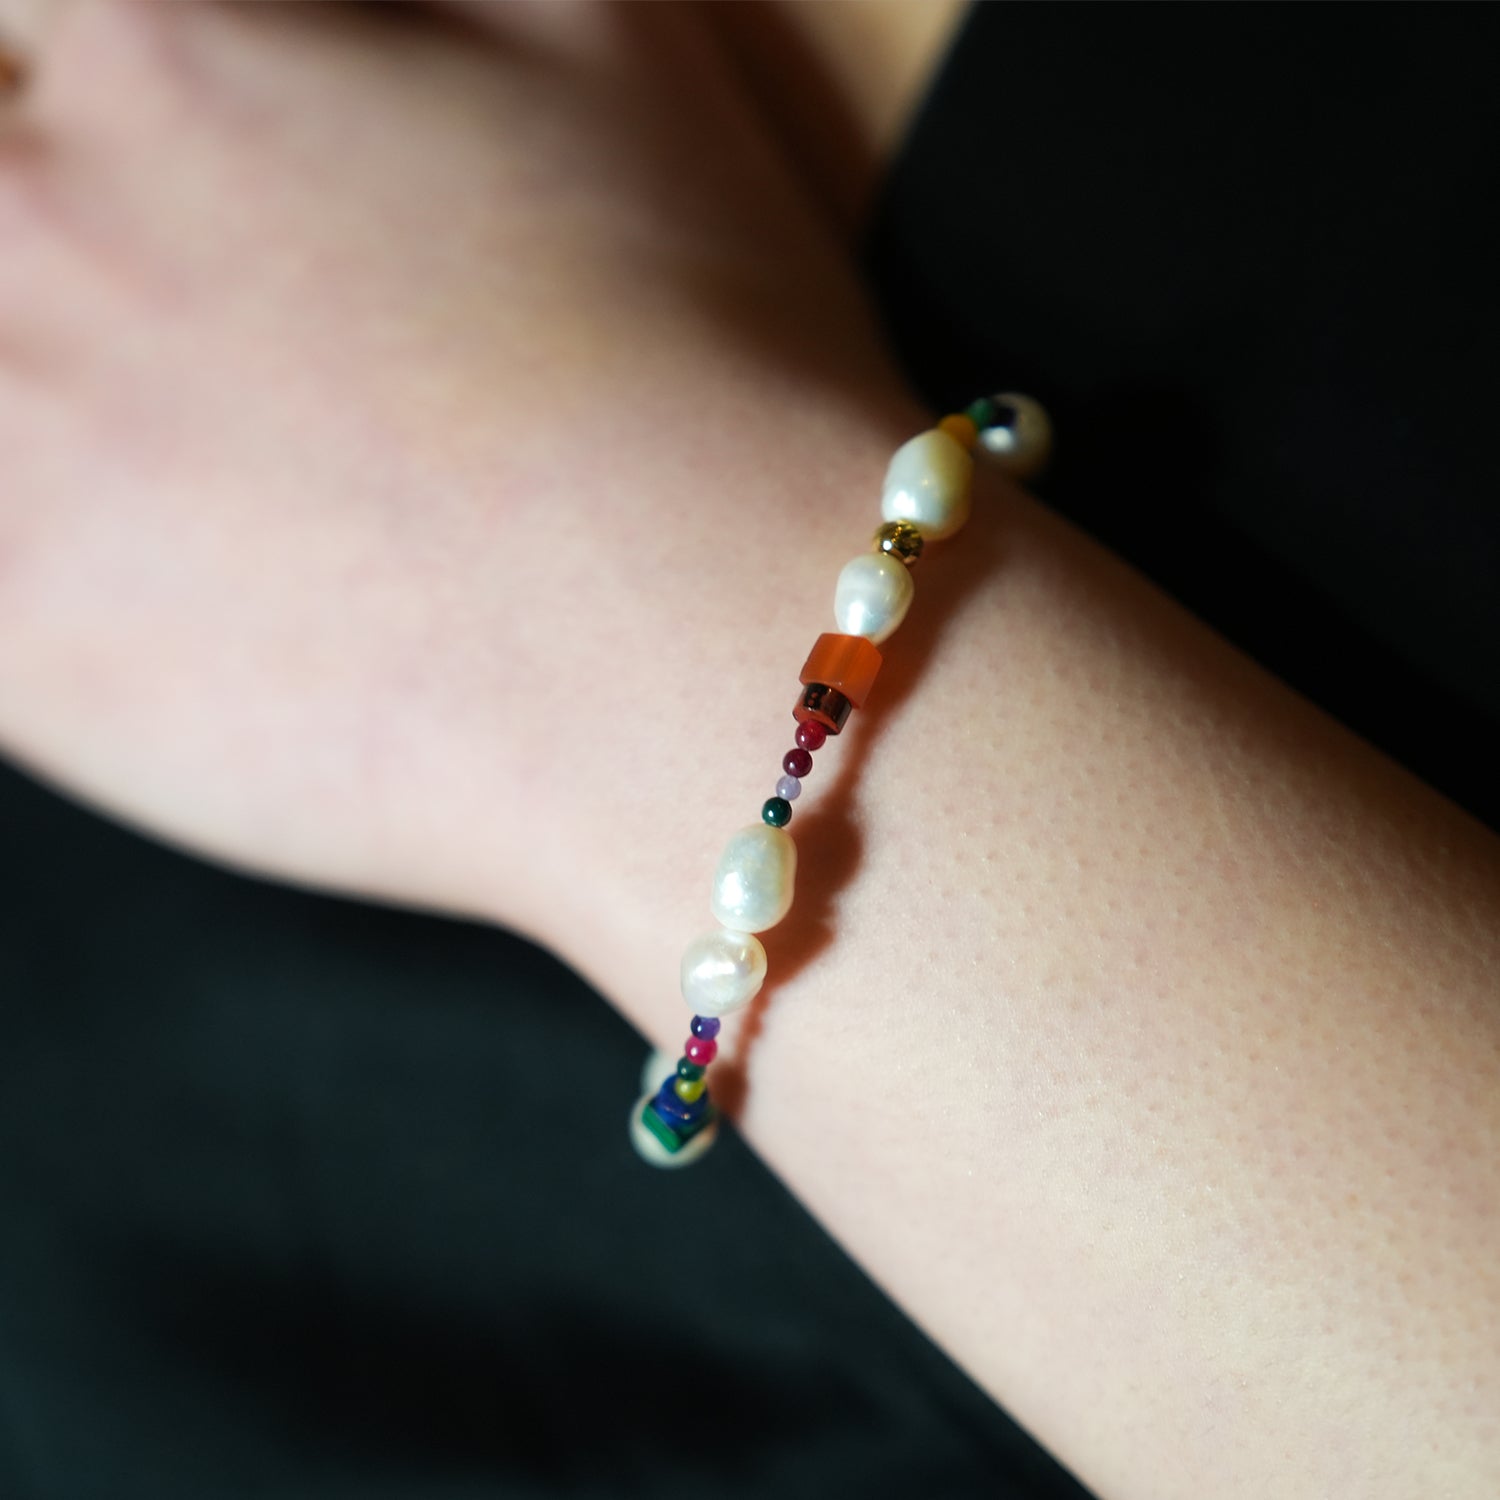 Style AMADIA 4663: Paradise Found - Colourful Bracelet with Gold Beads, Natural Stones, and Freshwater Pearls.